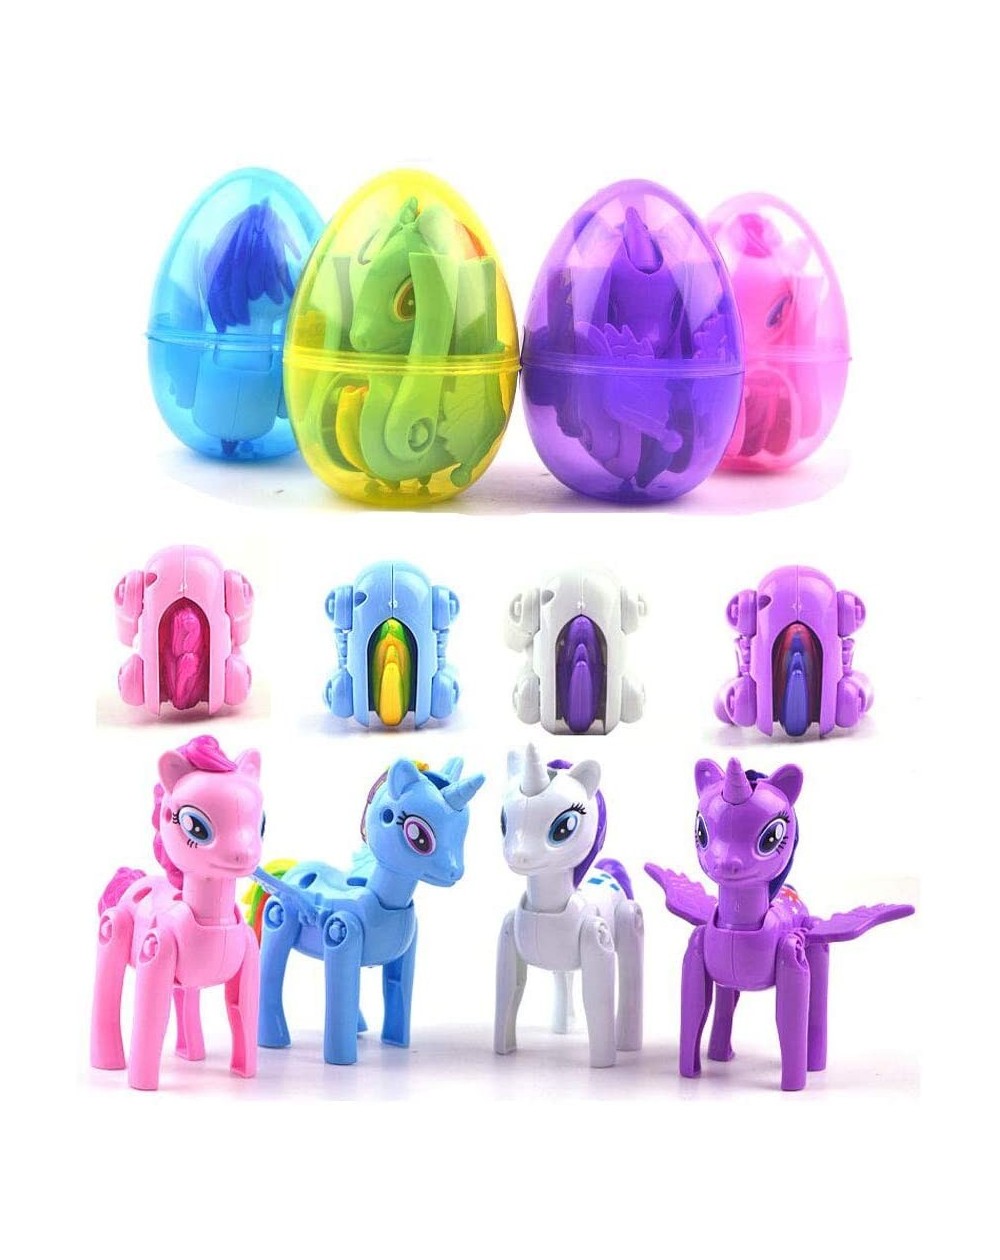 Party Favors 4 Pack Jumbo Unicorn Deformation Eggs with Toys Inside for Kids Boys Girls Christmas Stocking Stuffers Gifts Par...